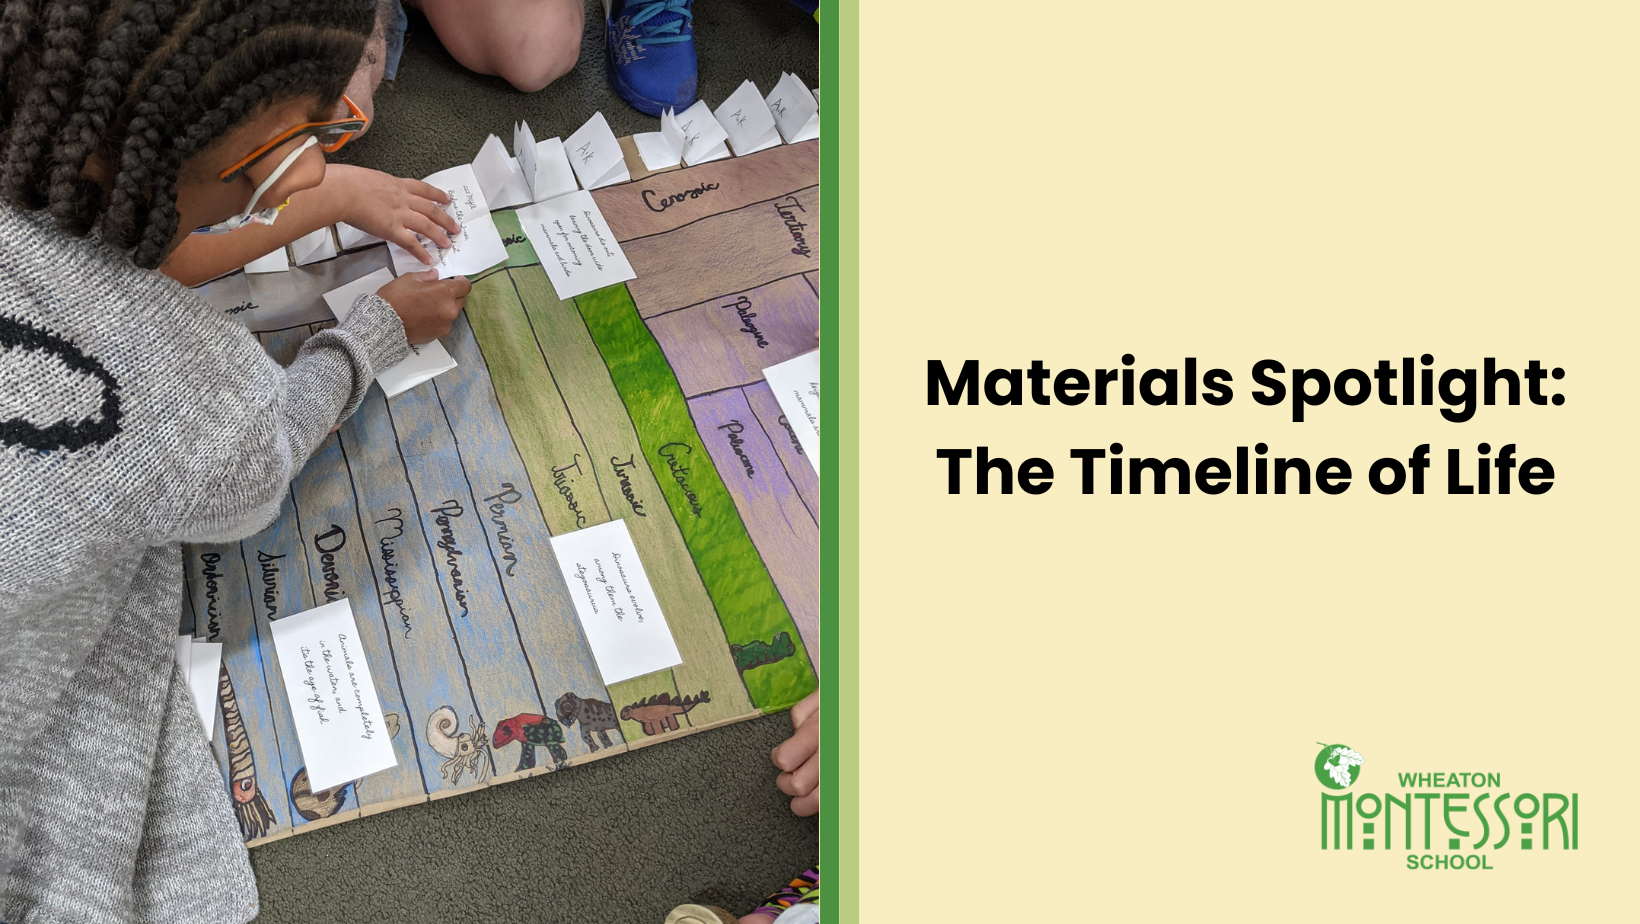 Materials Spotlight: The Timeline of Life